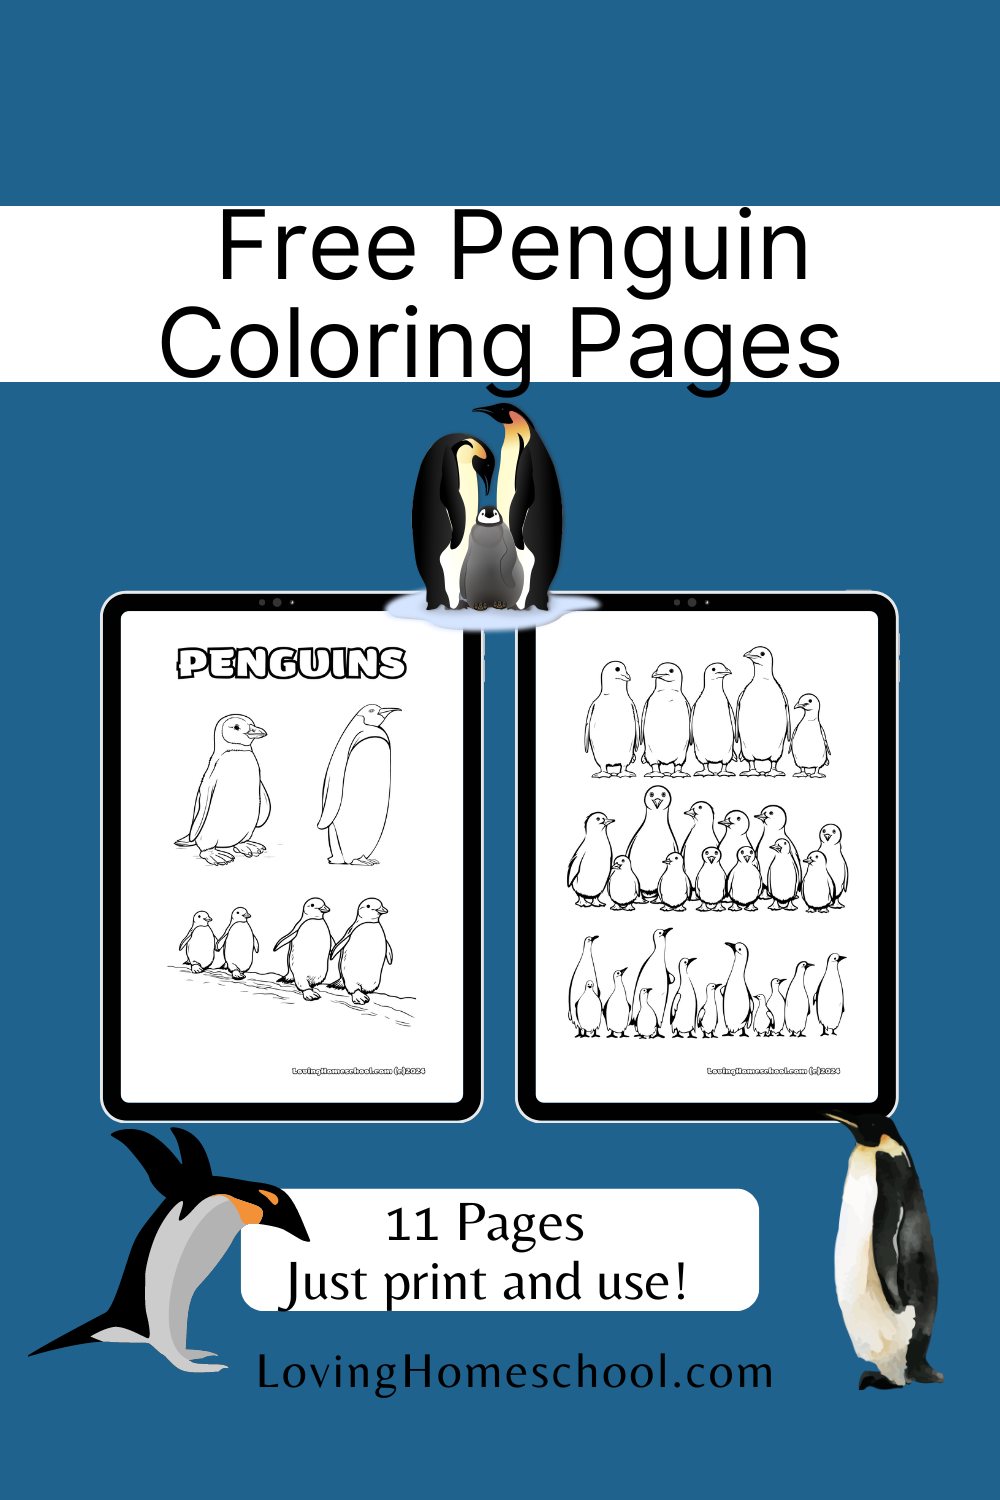 11 Penguin Coloring Pages Pinterest Pin